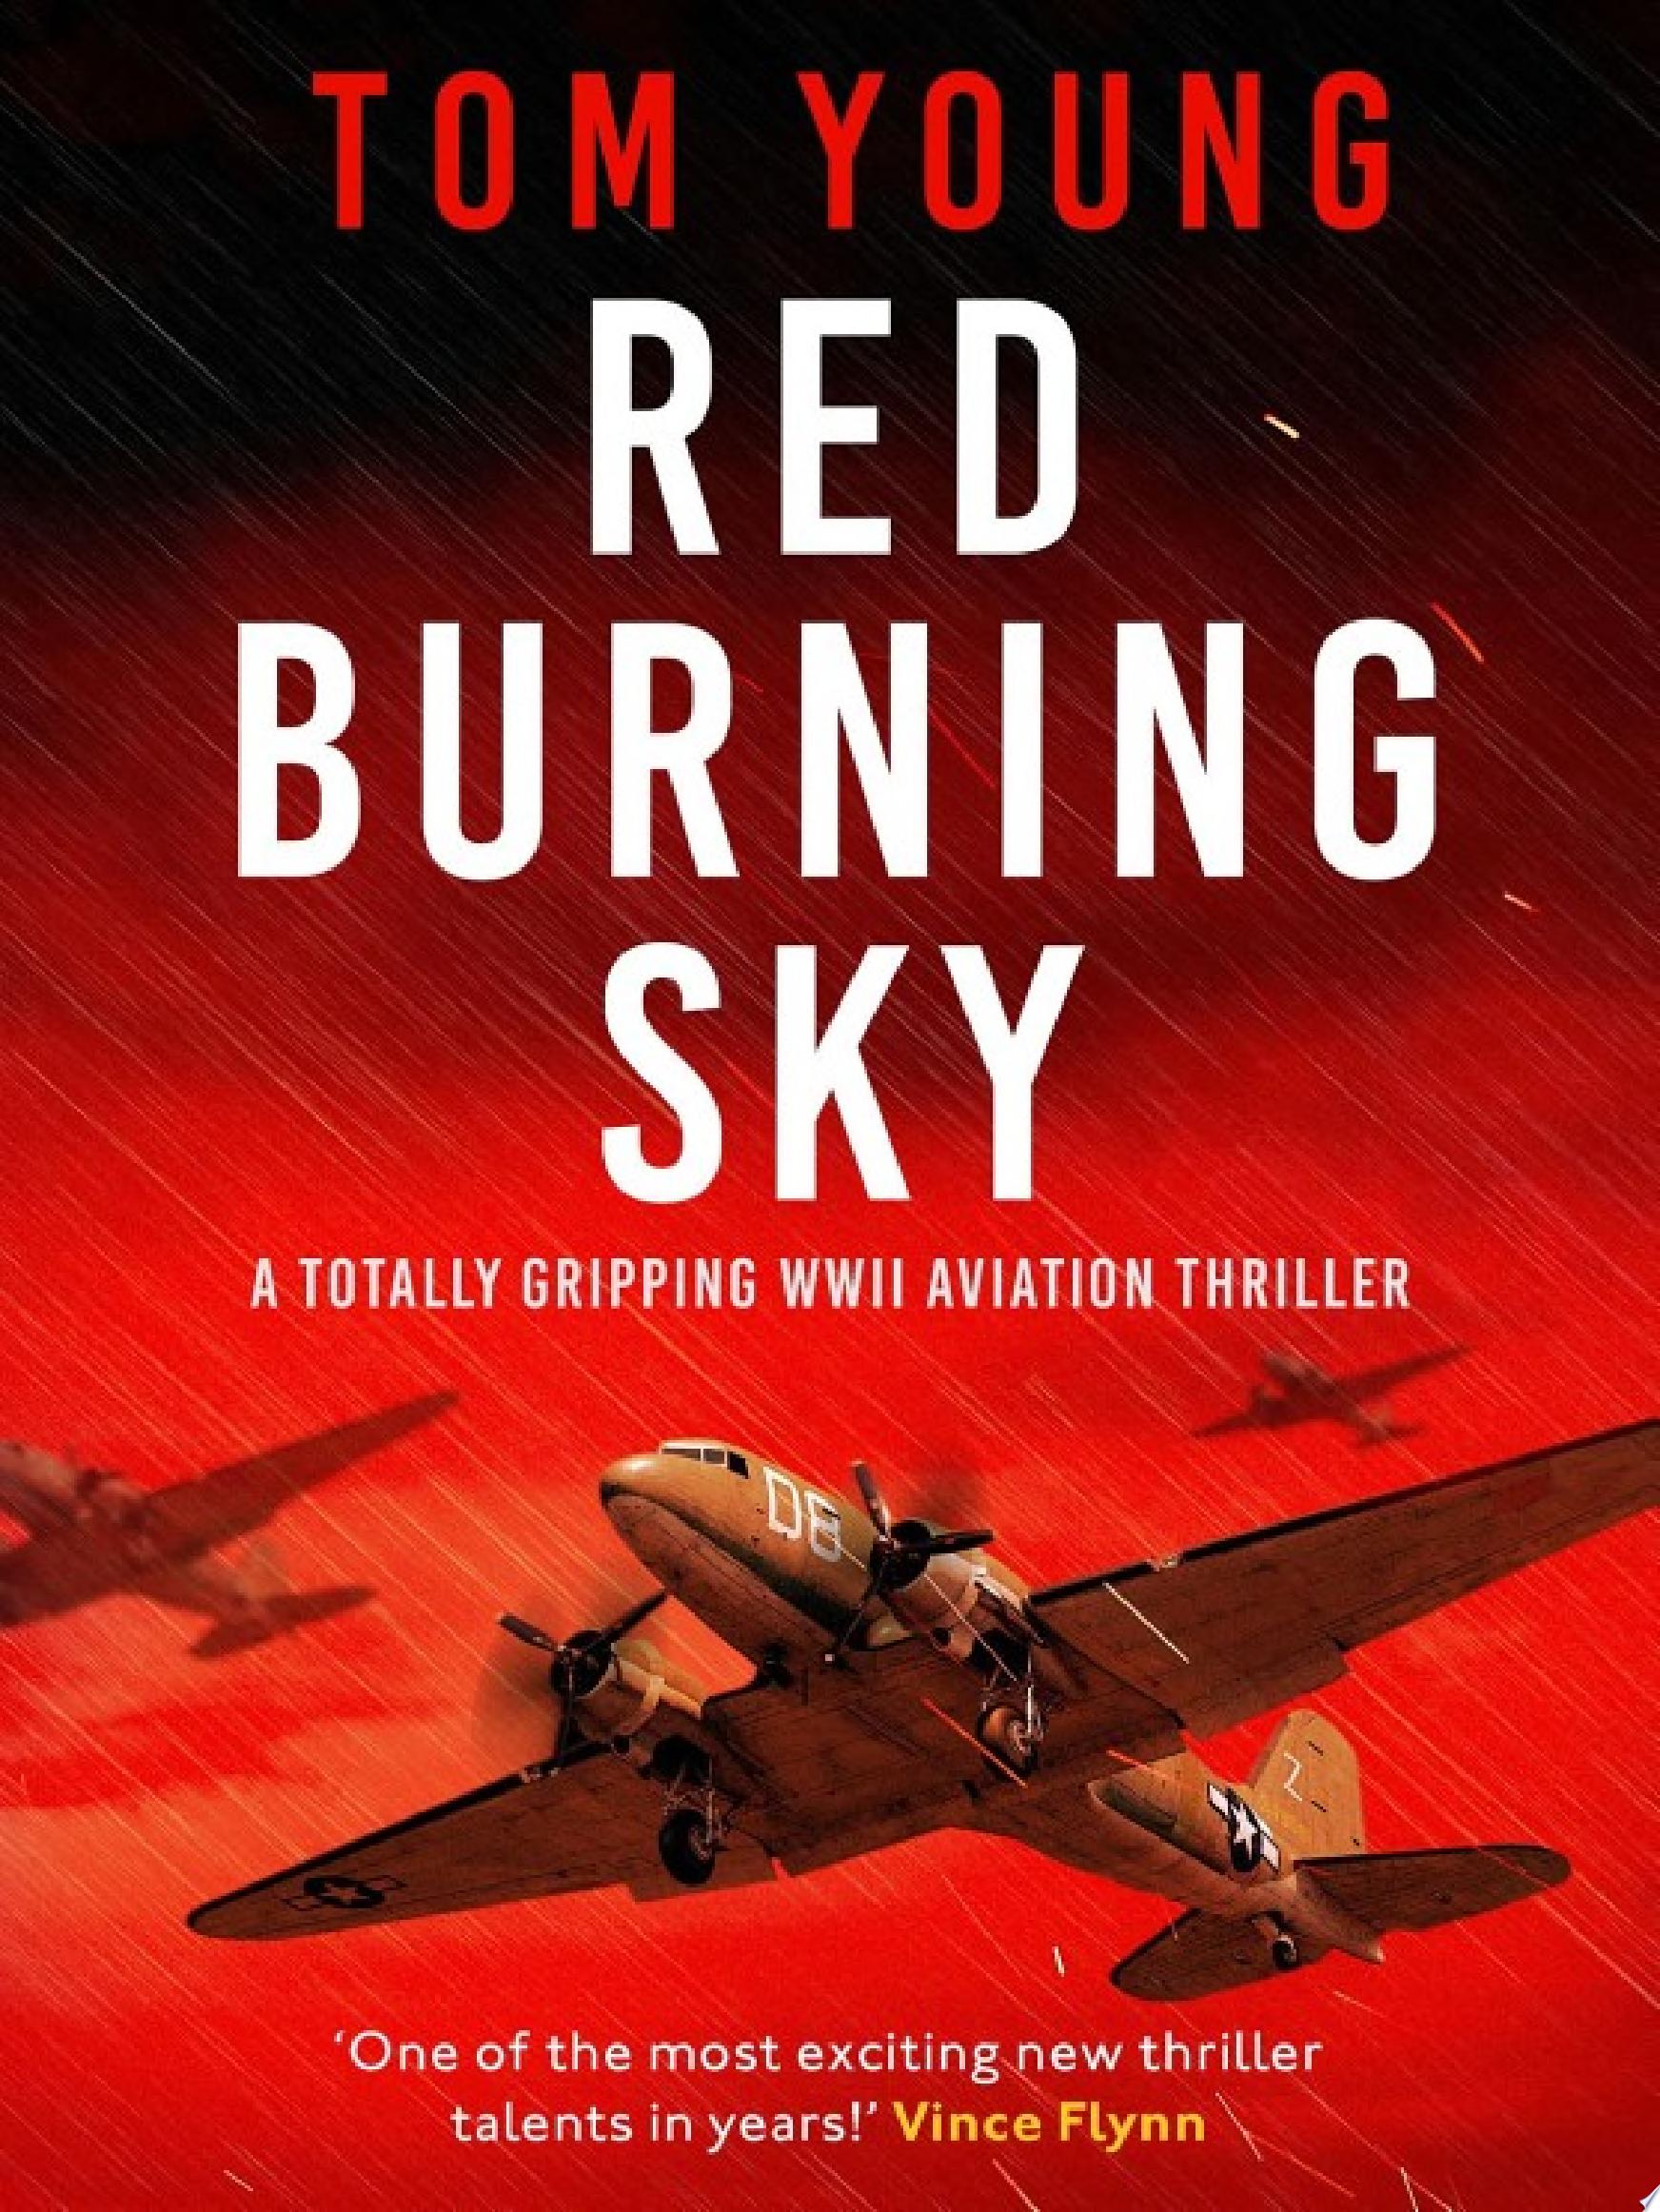 Image for "Red Burning Sky"